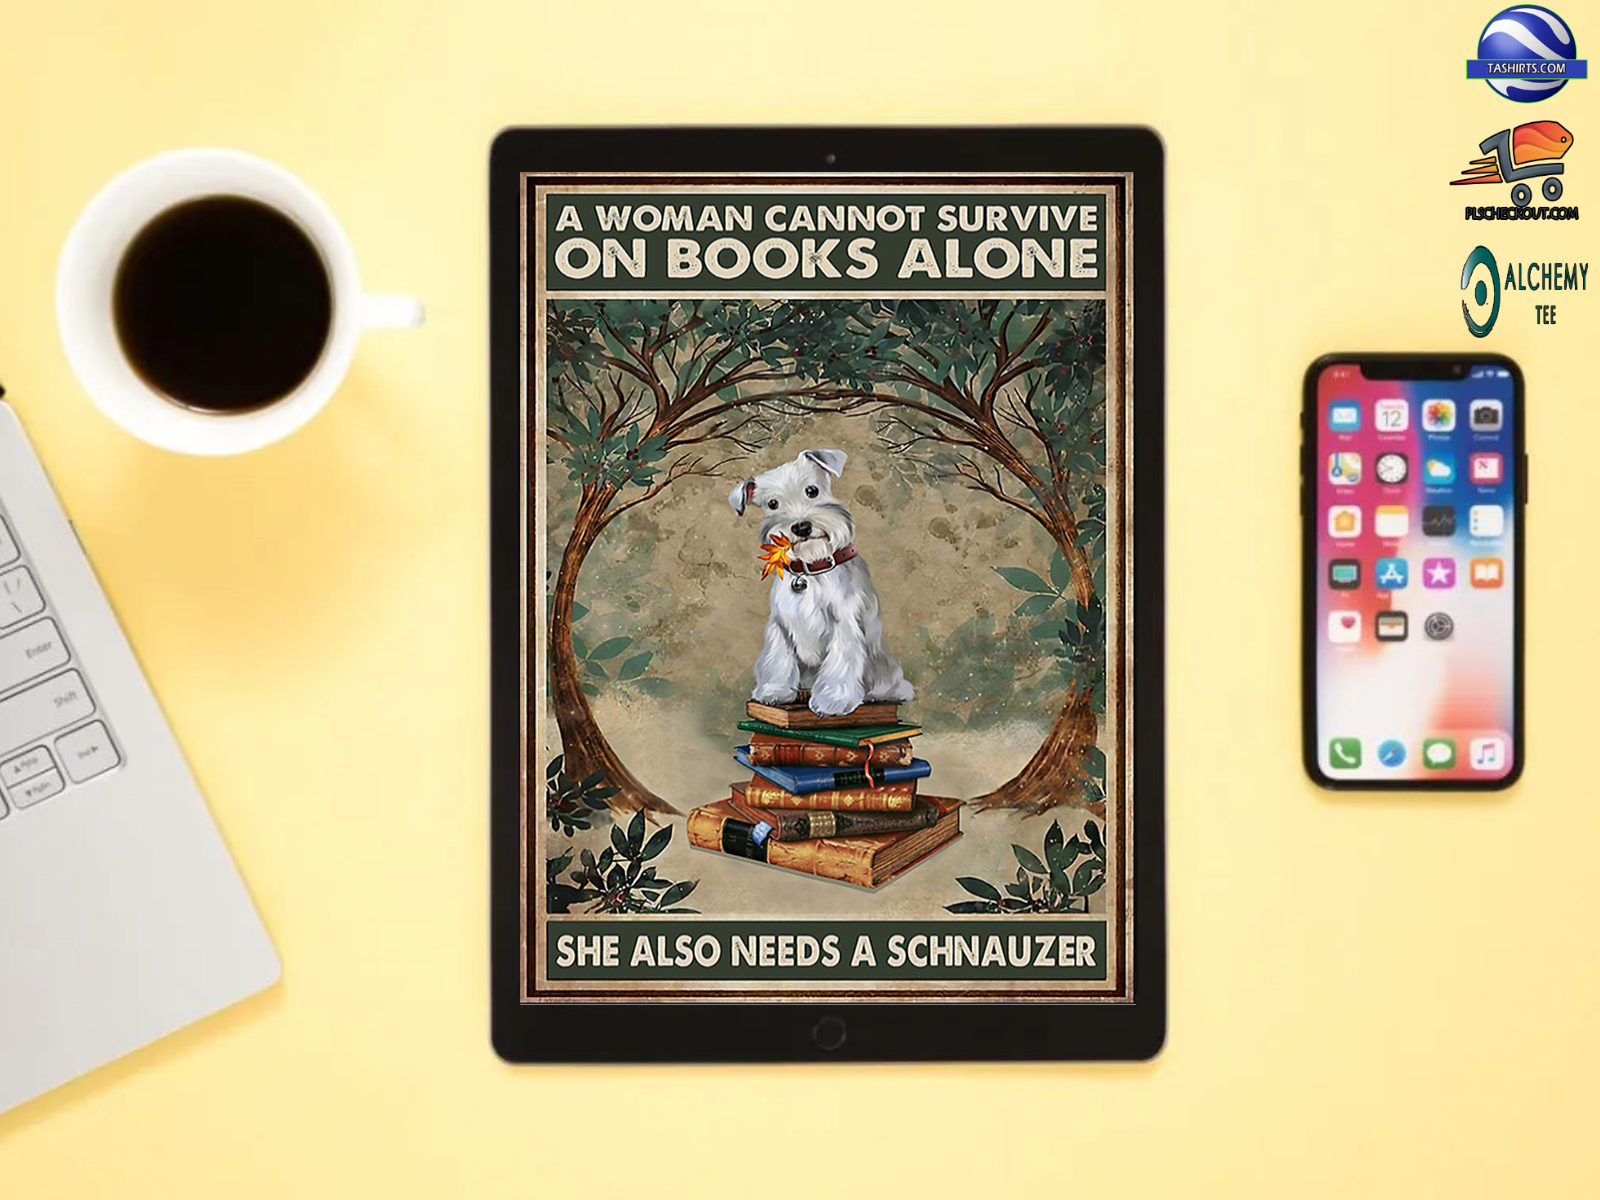 A woman can’t survive on books alone she also needs a schnauzer poster